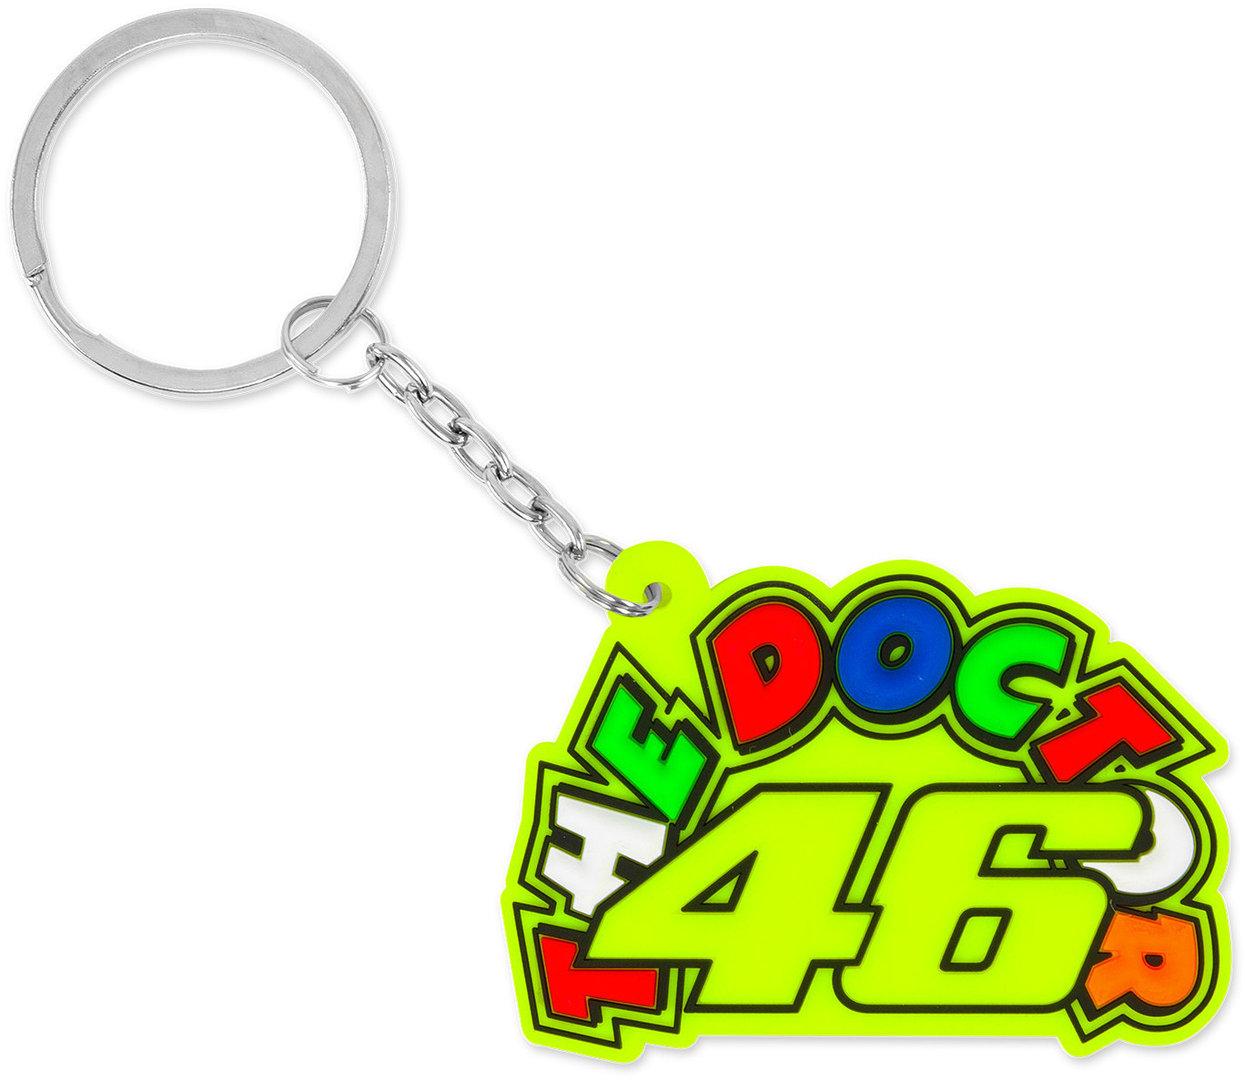 VR46 Classic 46 The Doctor Keychain, yellow, yellow, Size One Size